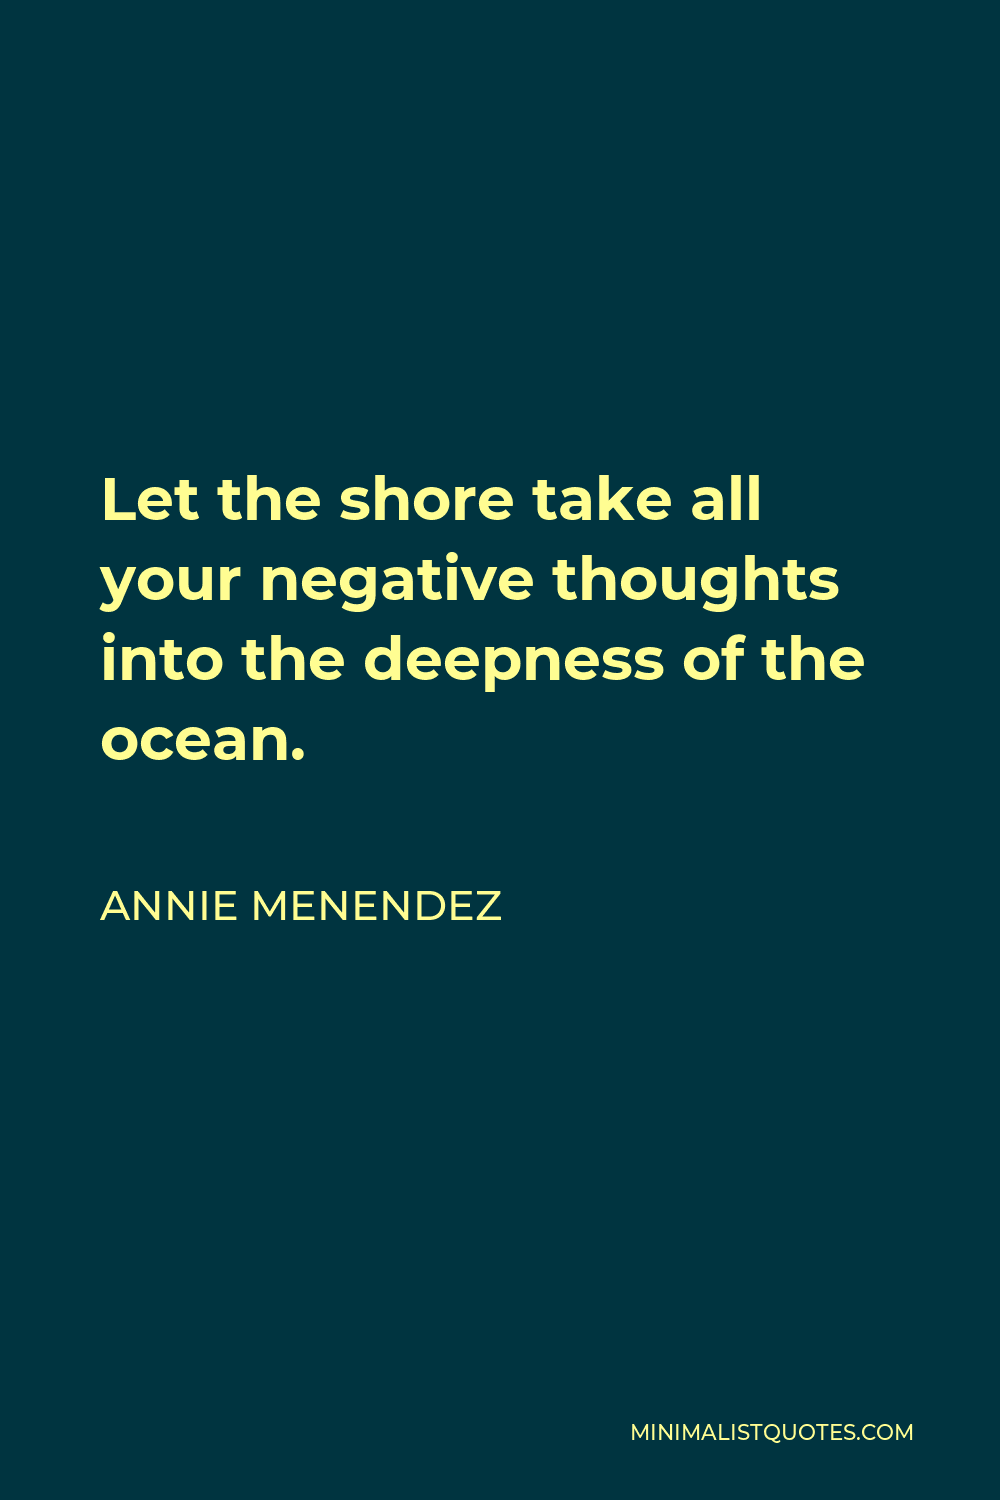 Annie Menendez Quote - Let the shore take all your negative thoughts into the deepness of the ocean.